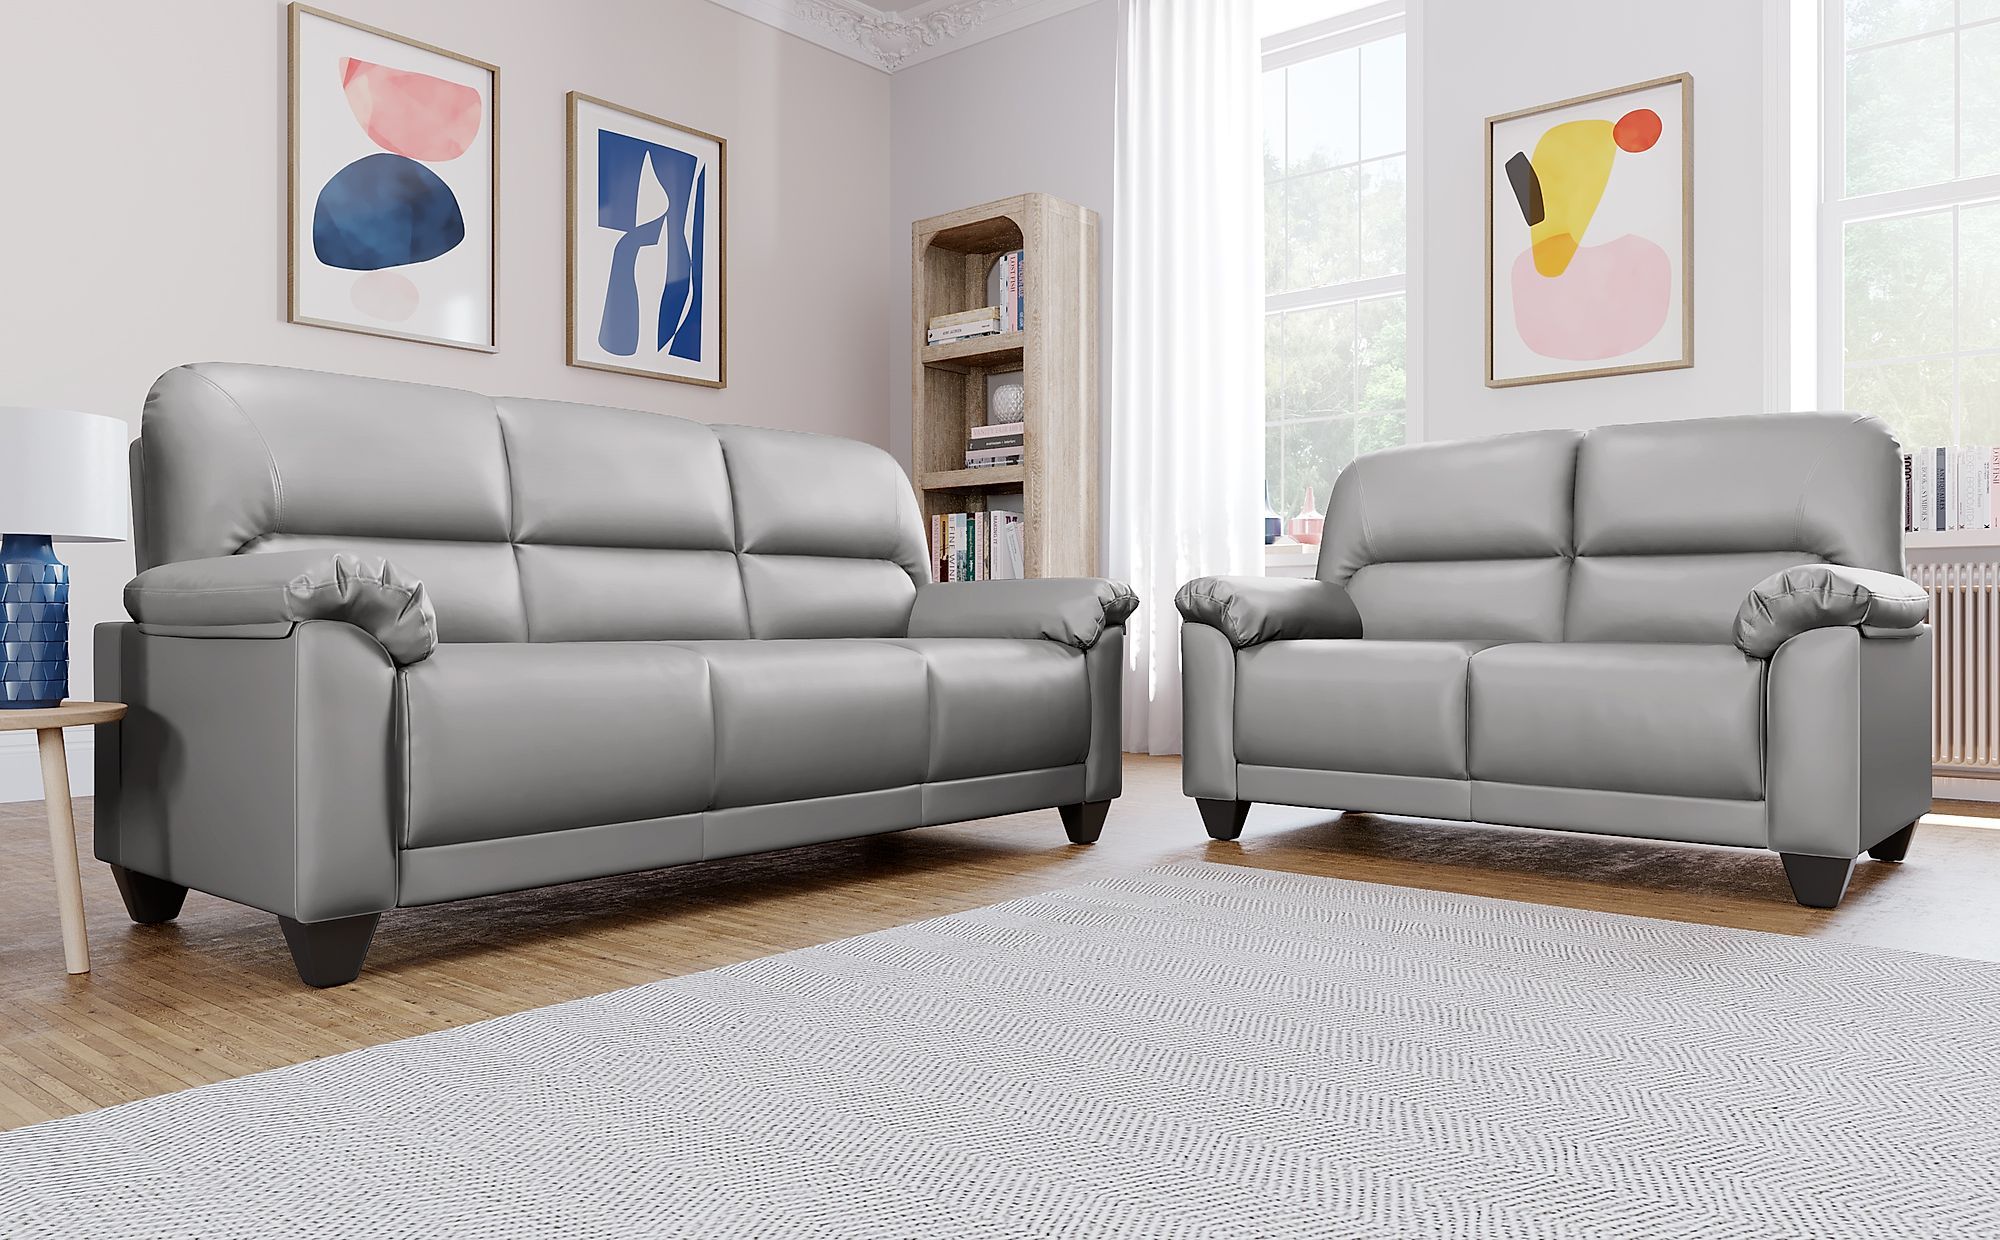 Kenton Small Light Grey Leather 3+2 Seater Sofa Set | Furniture Choice Intended For Sofas In Light Grey (View 19 of 20)